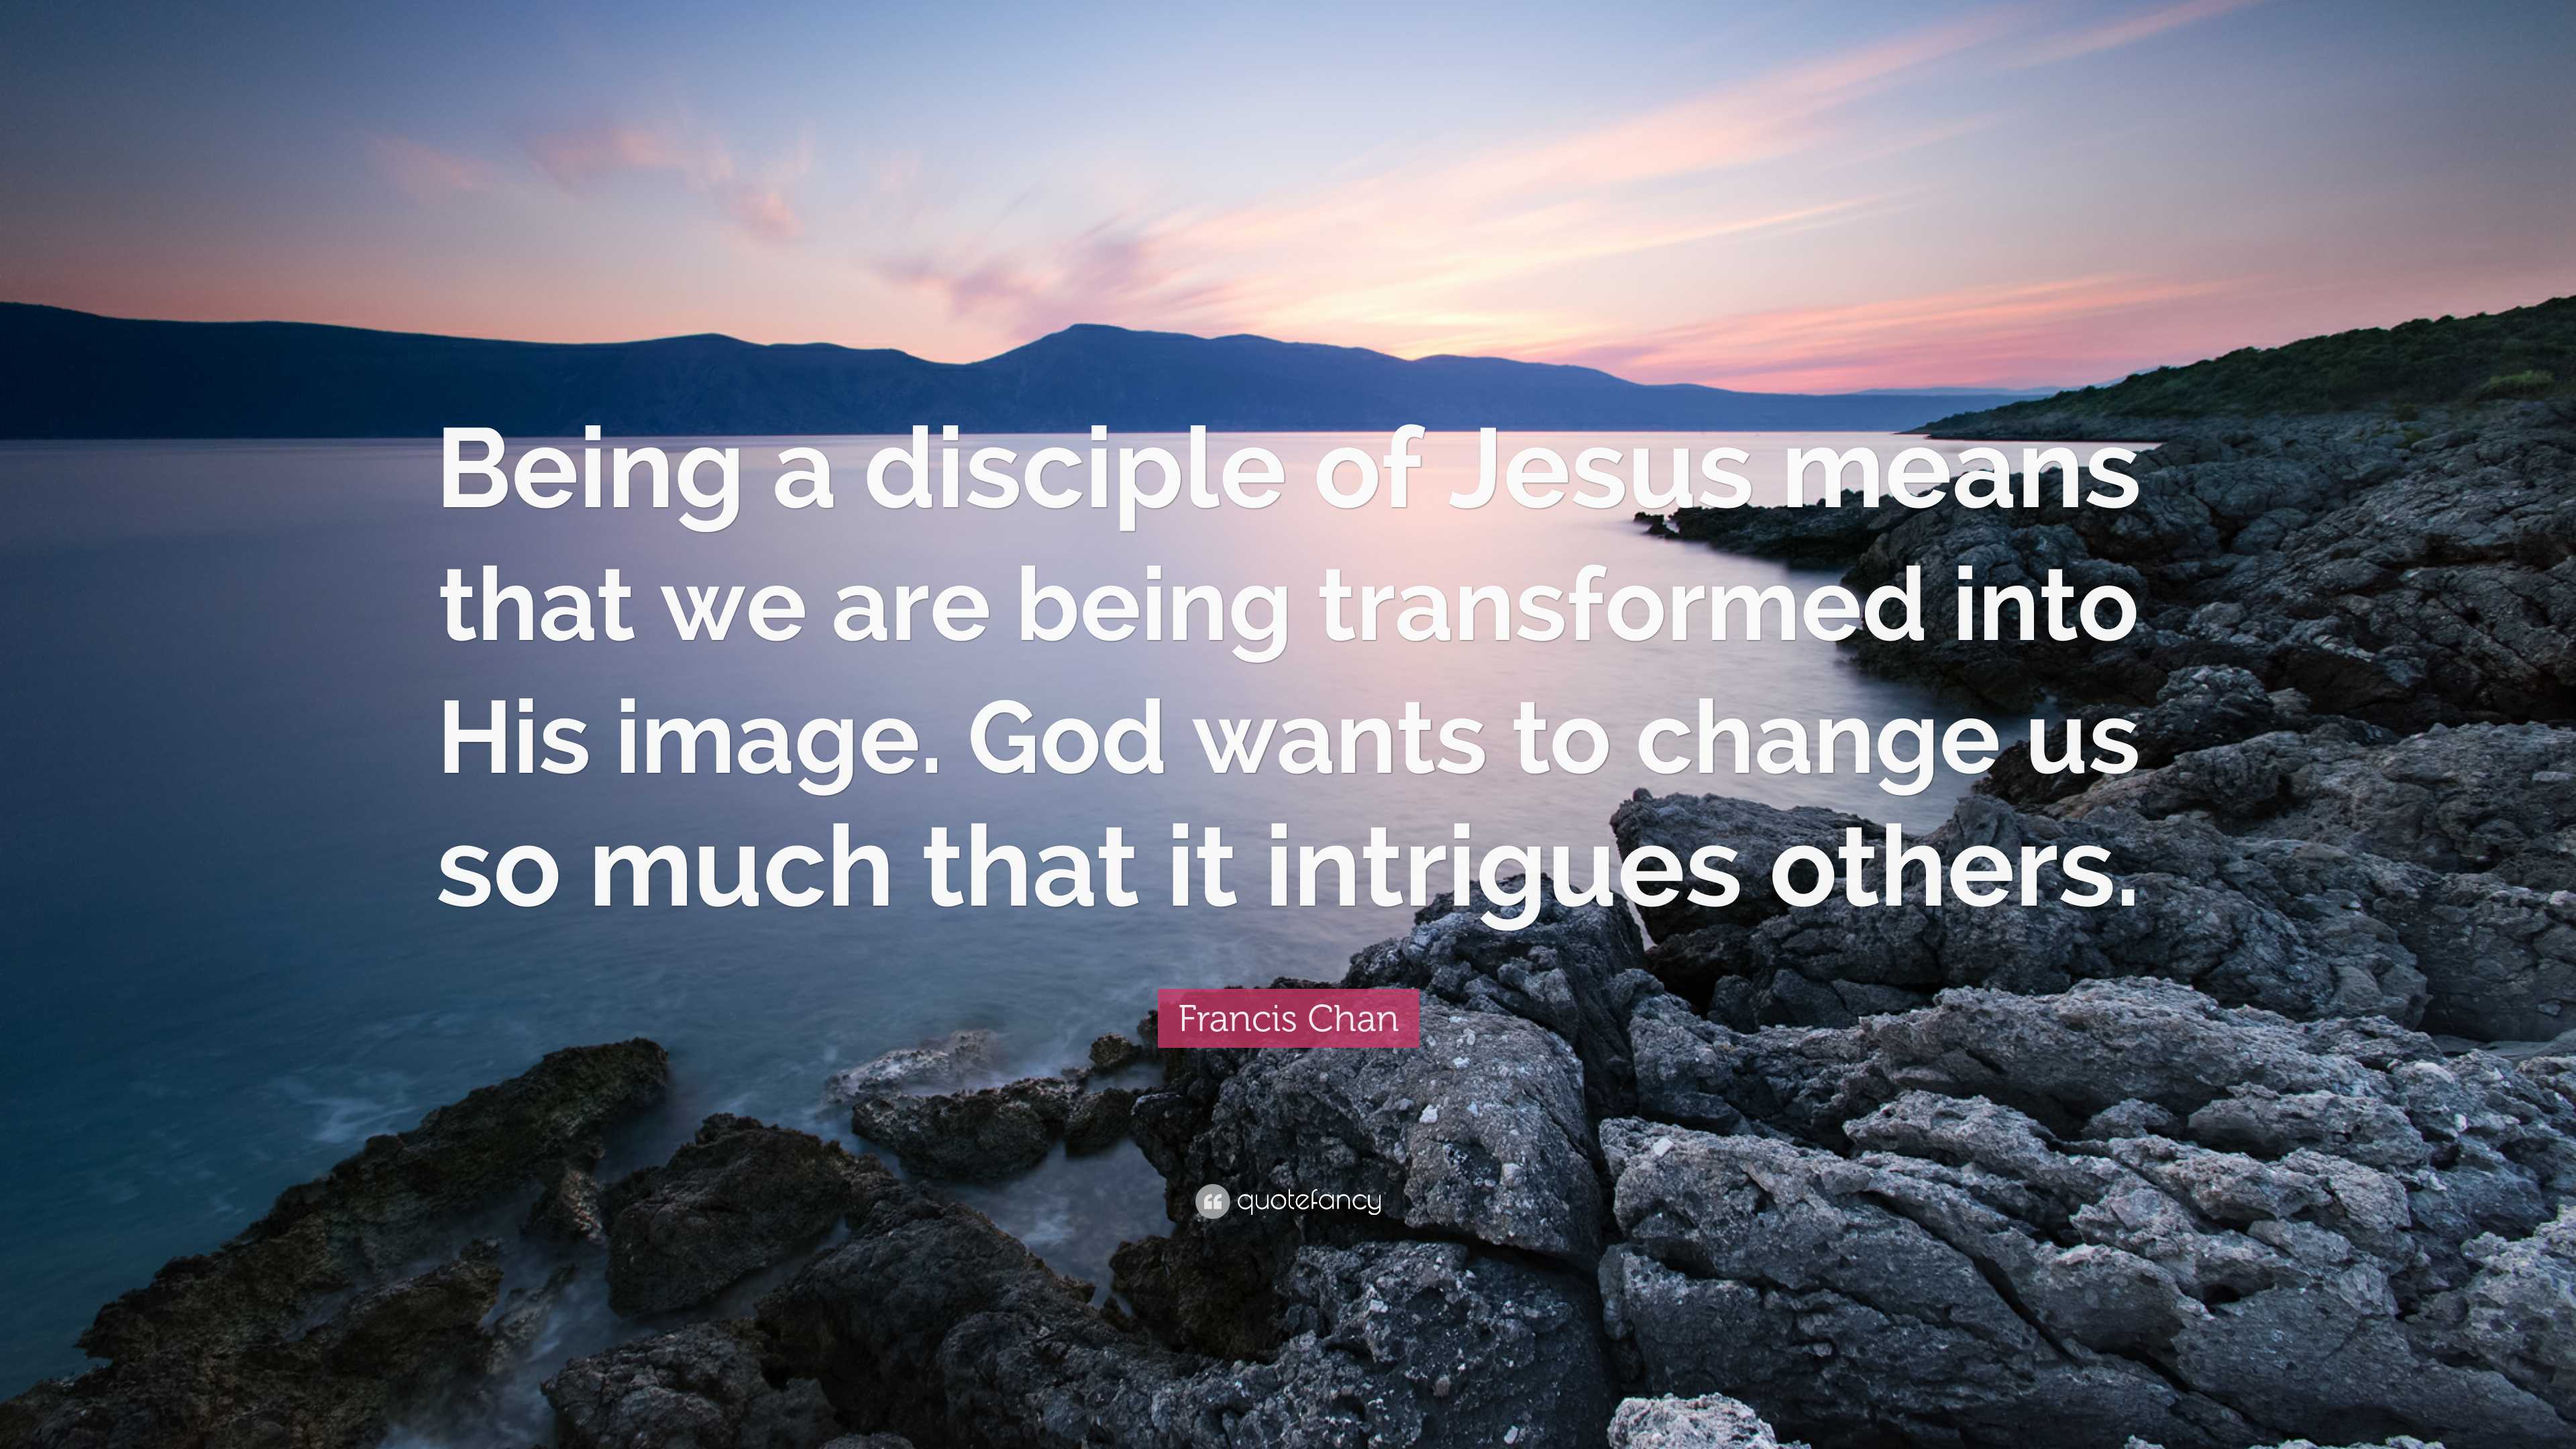 Disciple meaning